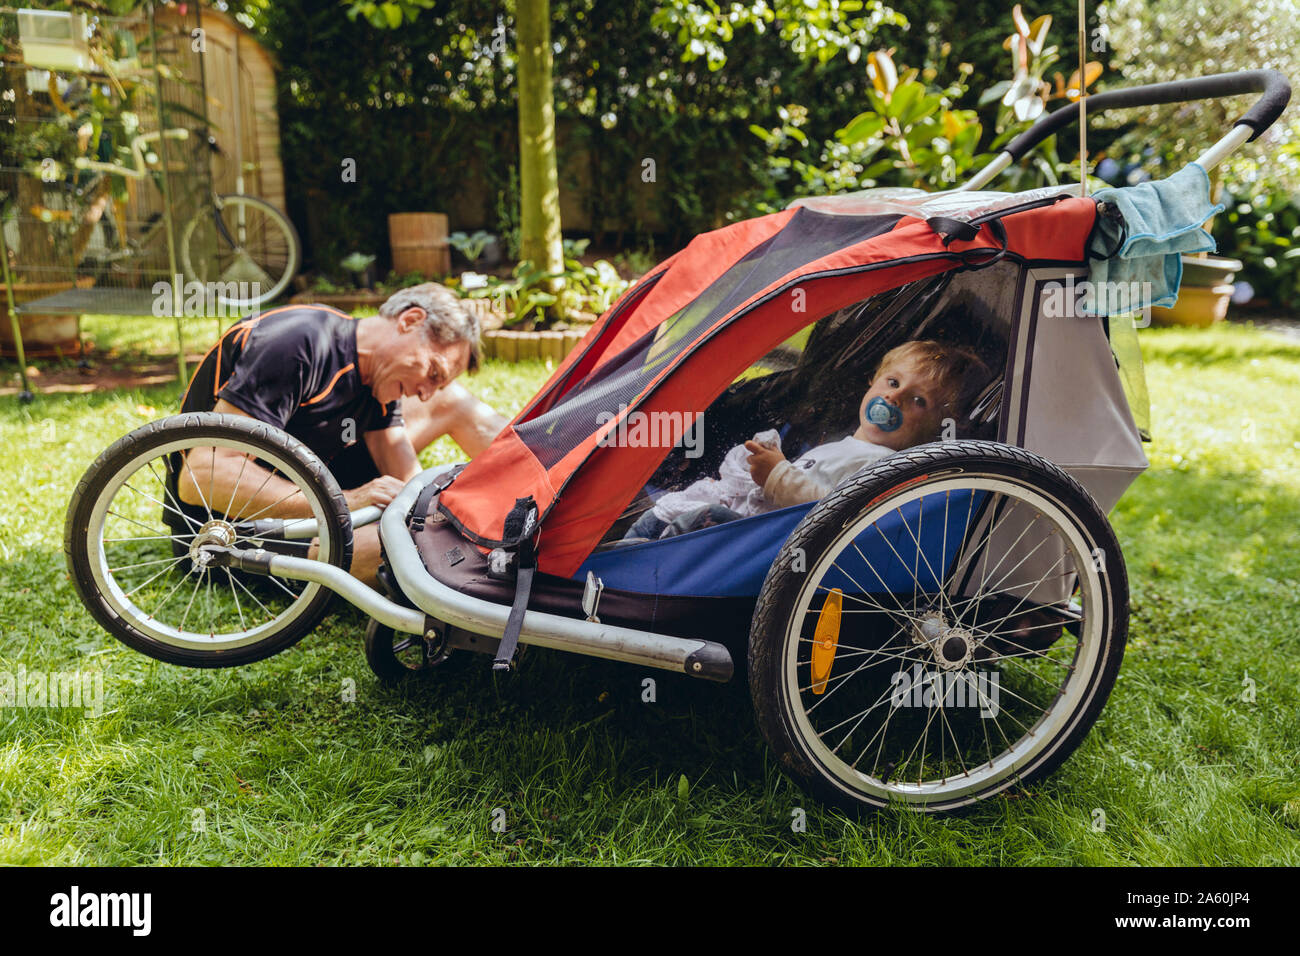 Father repairing bicycle trailer with baby boy sitting in it Stock Photo